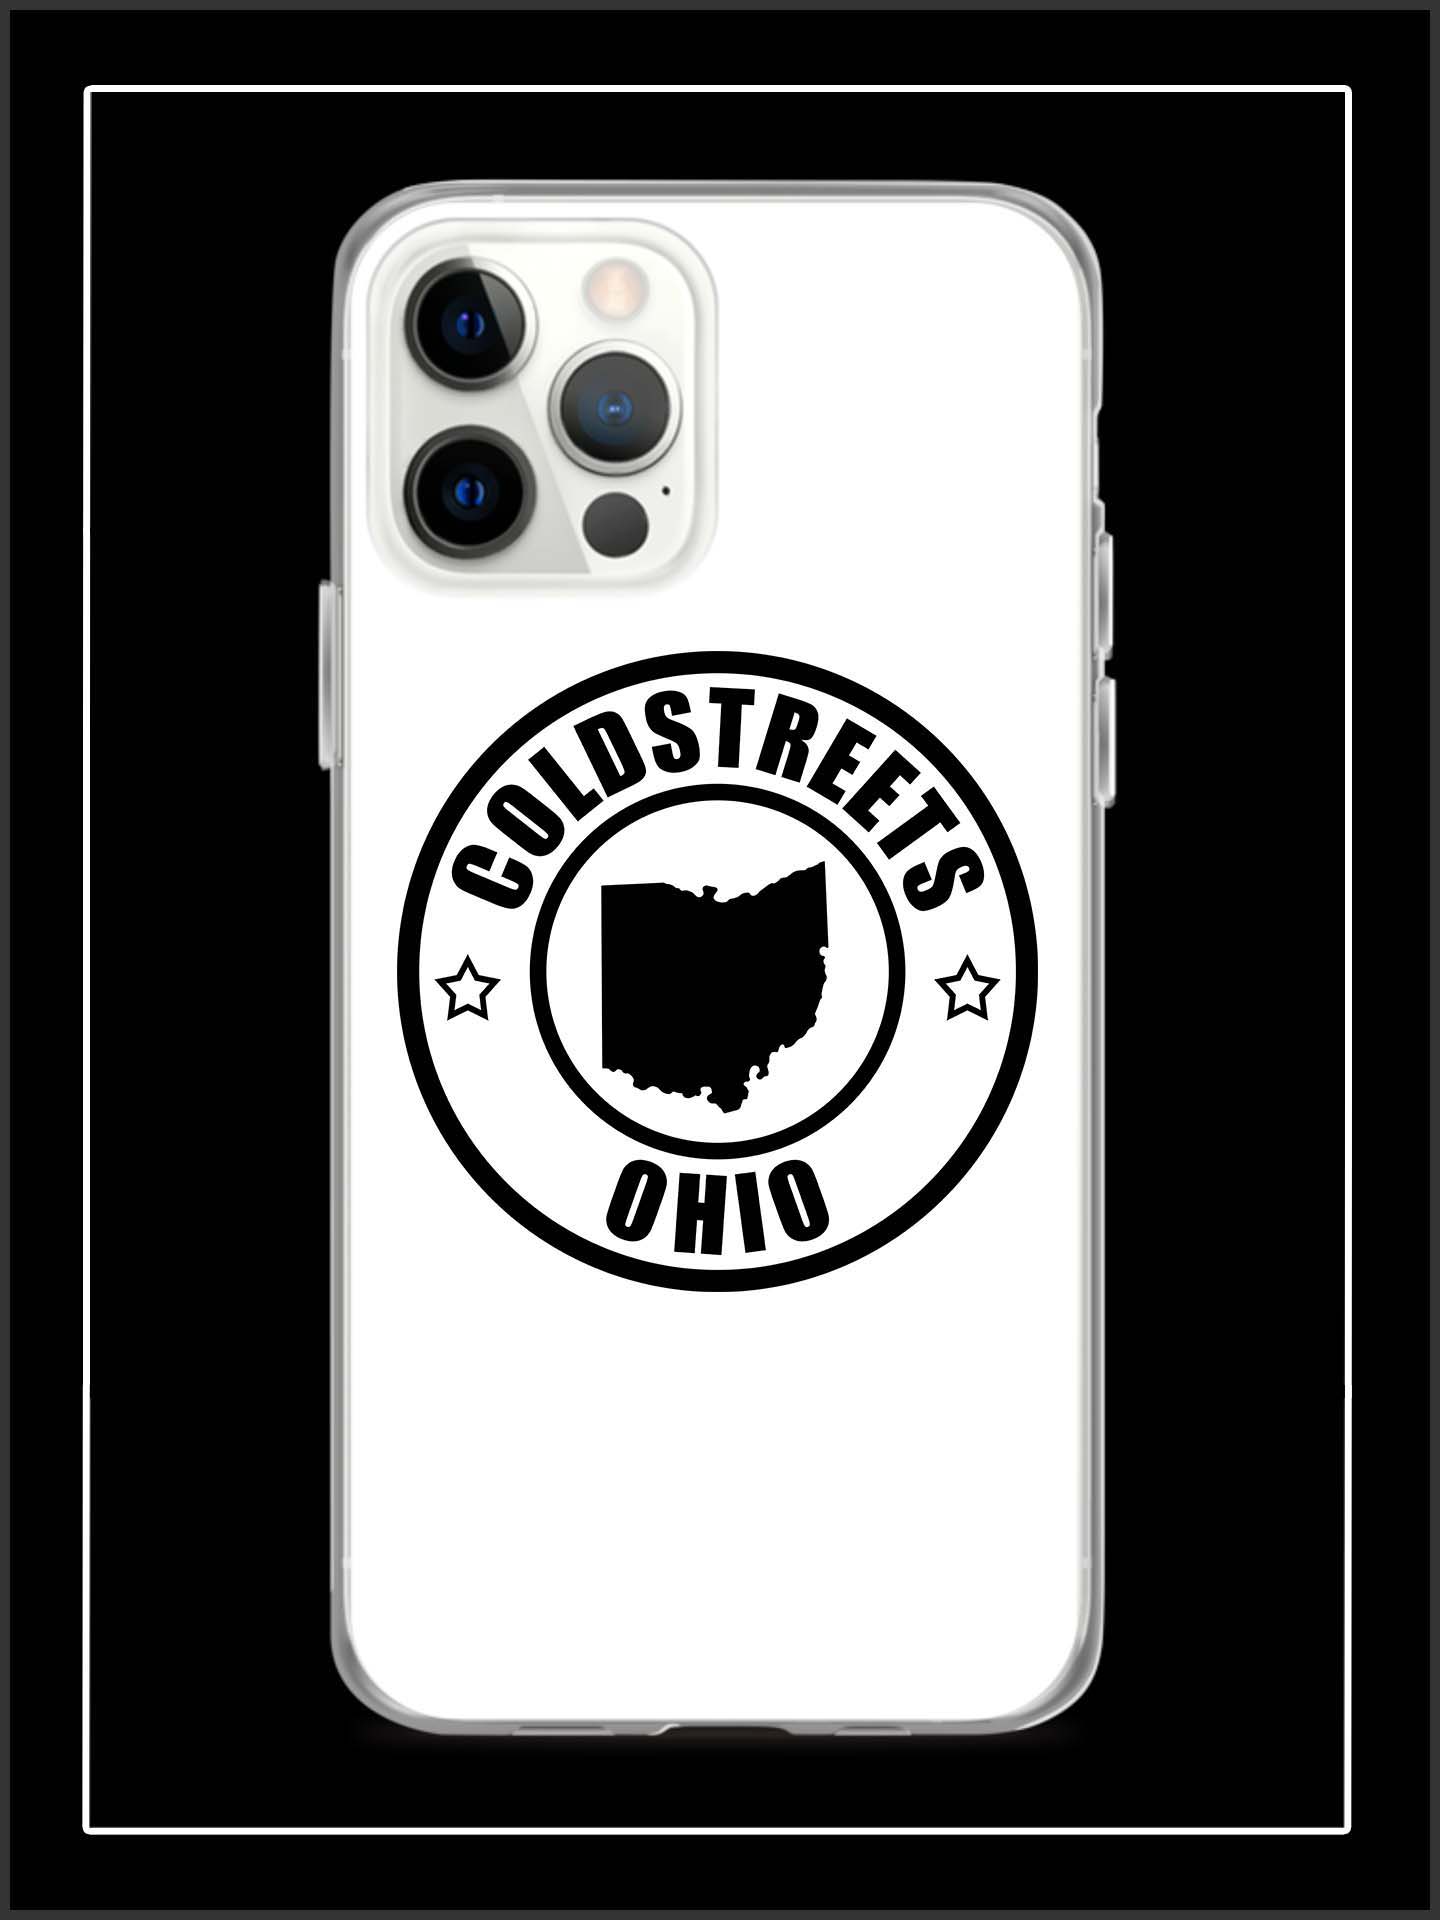 Cold Streets Ohio iPhone Cases